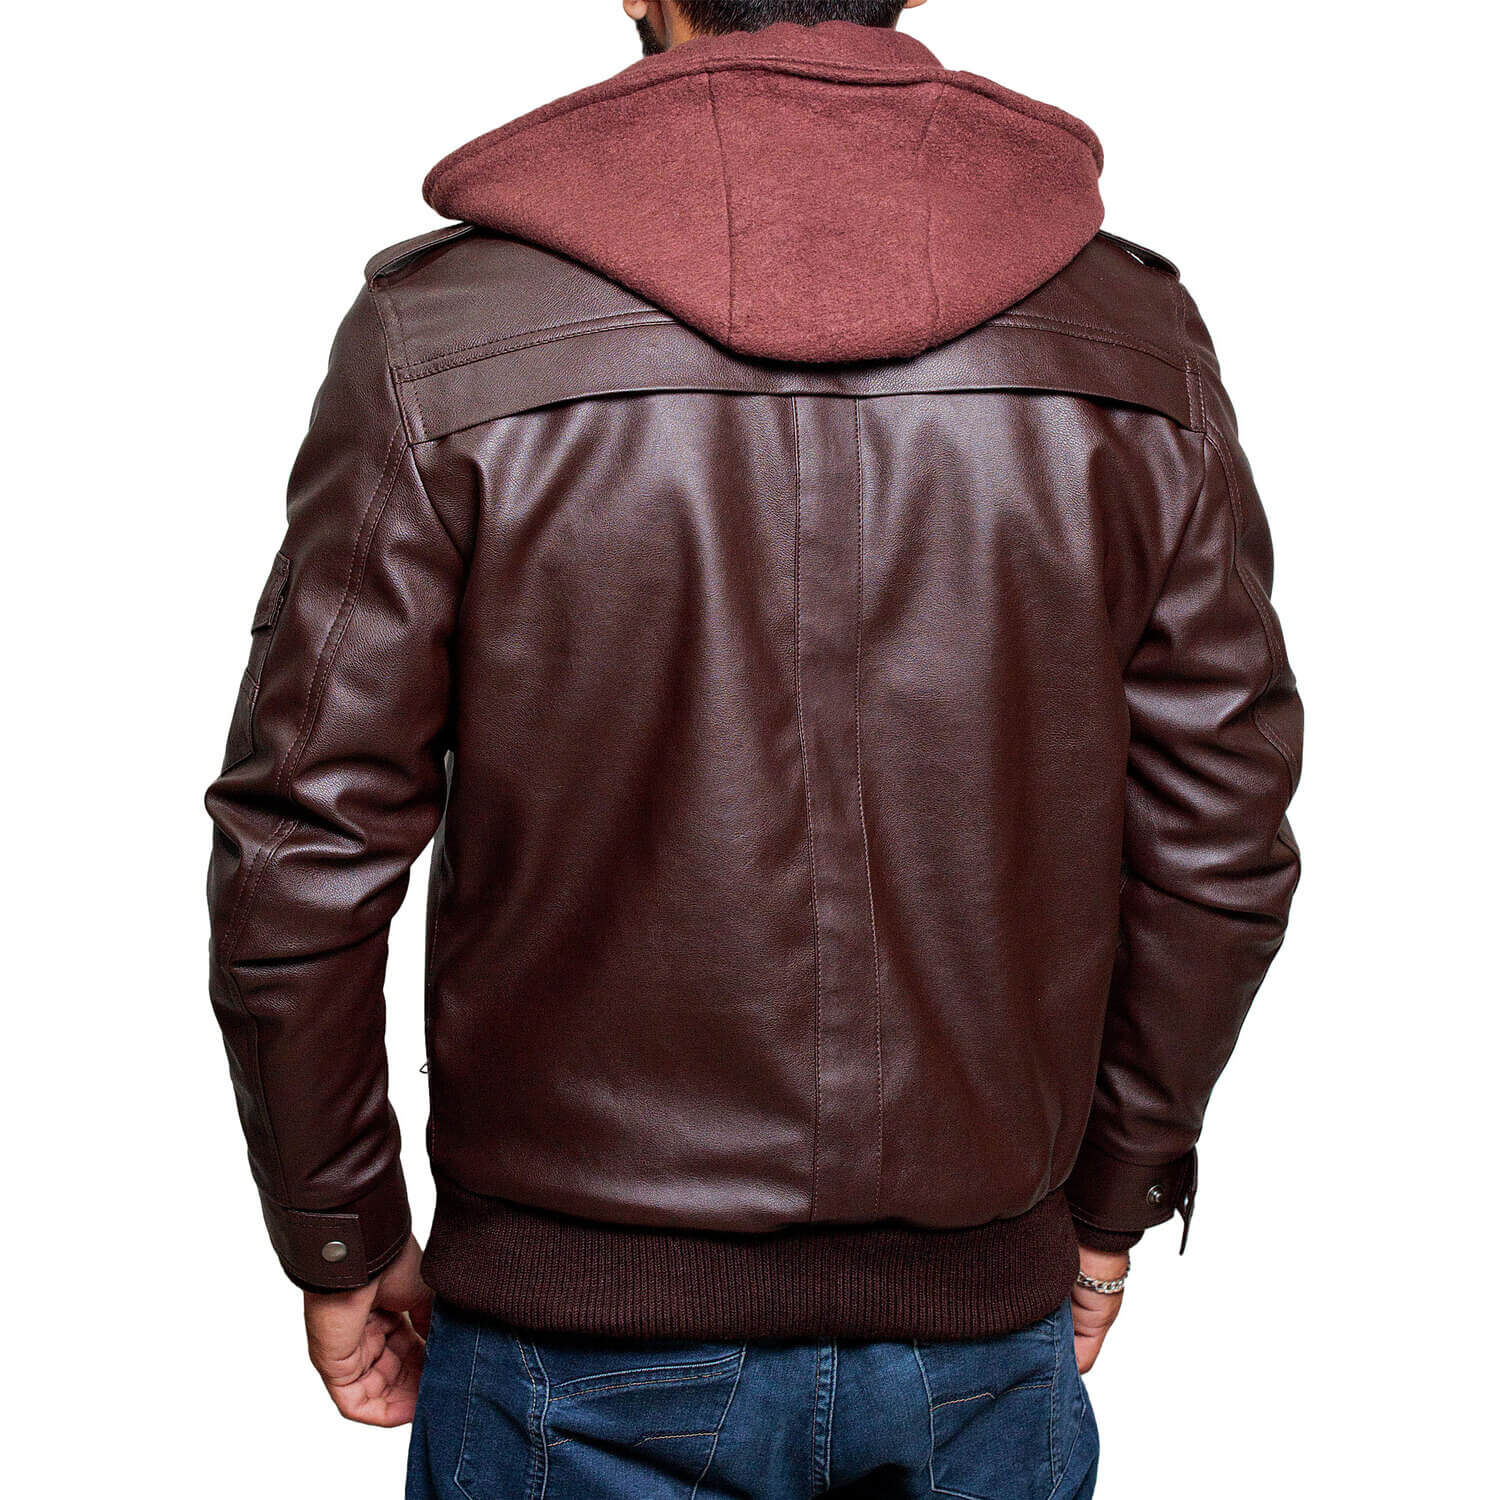 mens-brown-leather-jacket-with-hood-a3